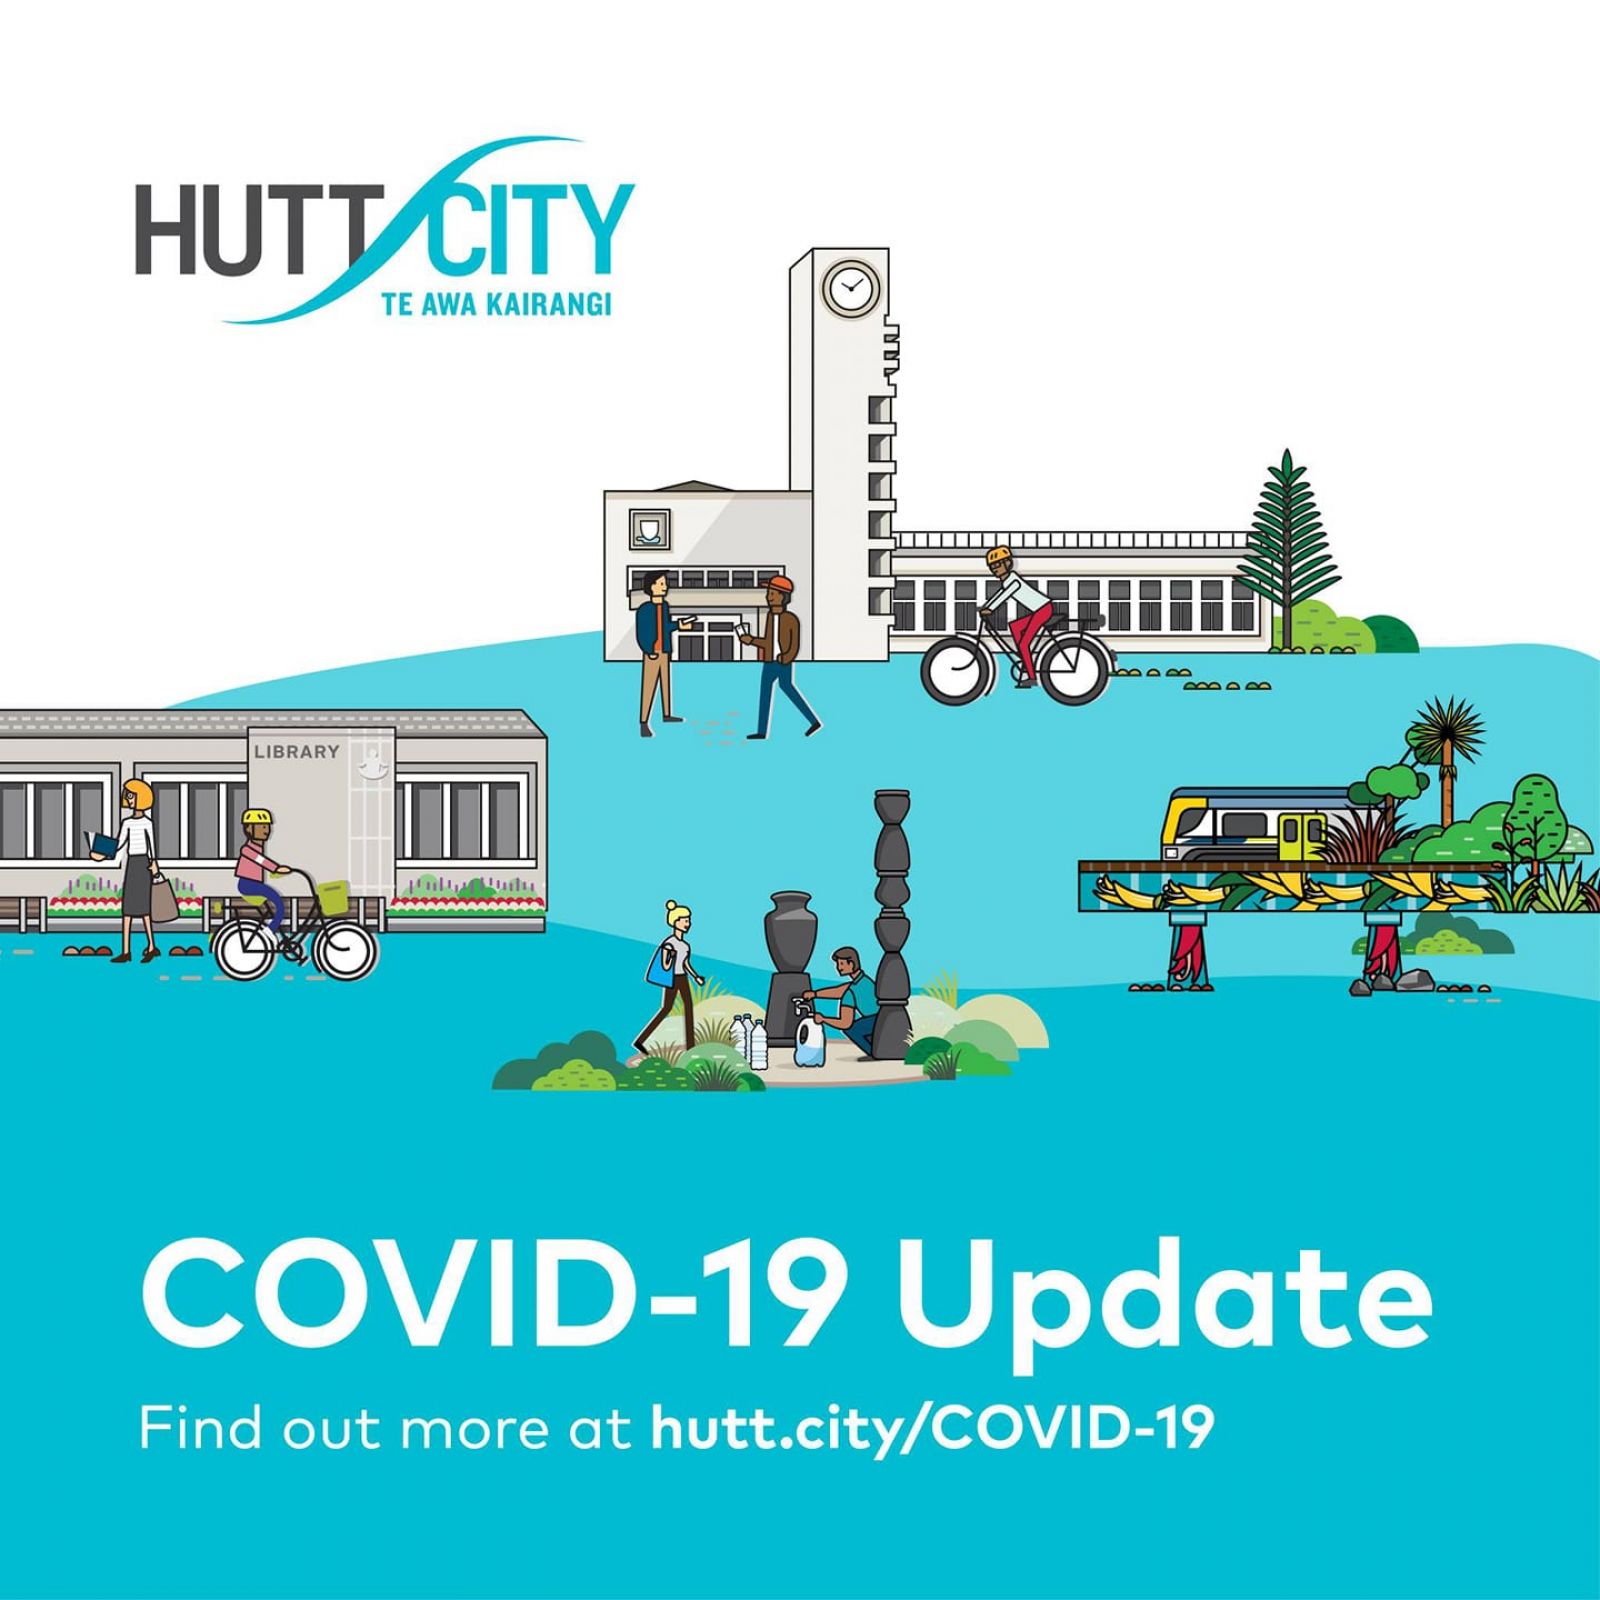 Hutt city council facilities depicted with white and blue background banner image